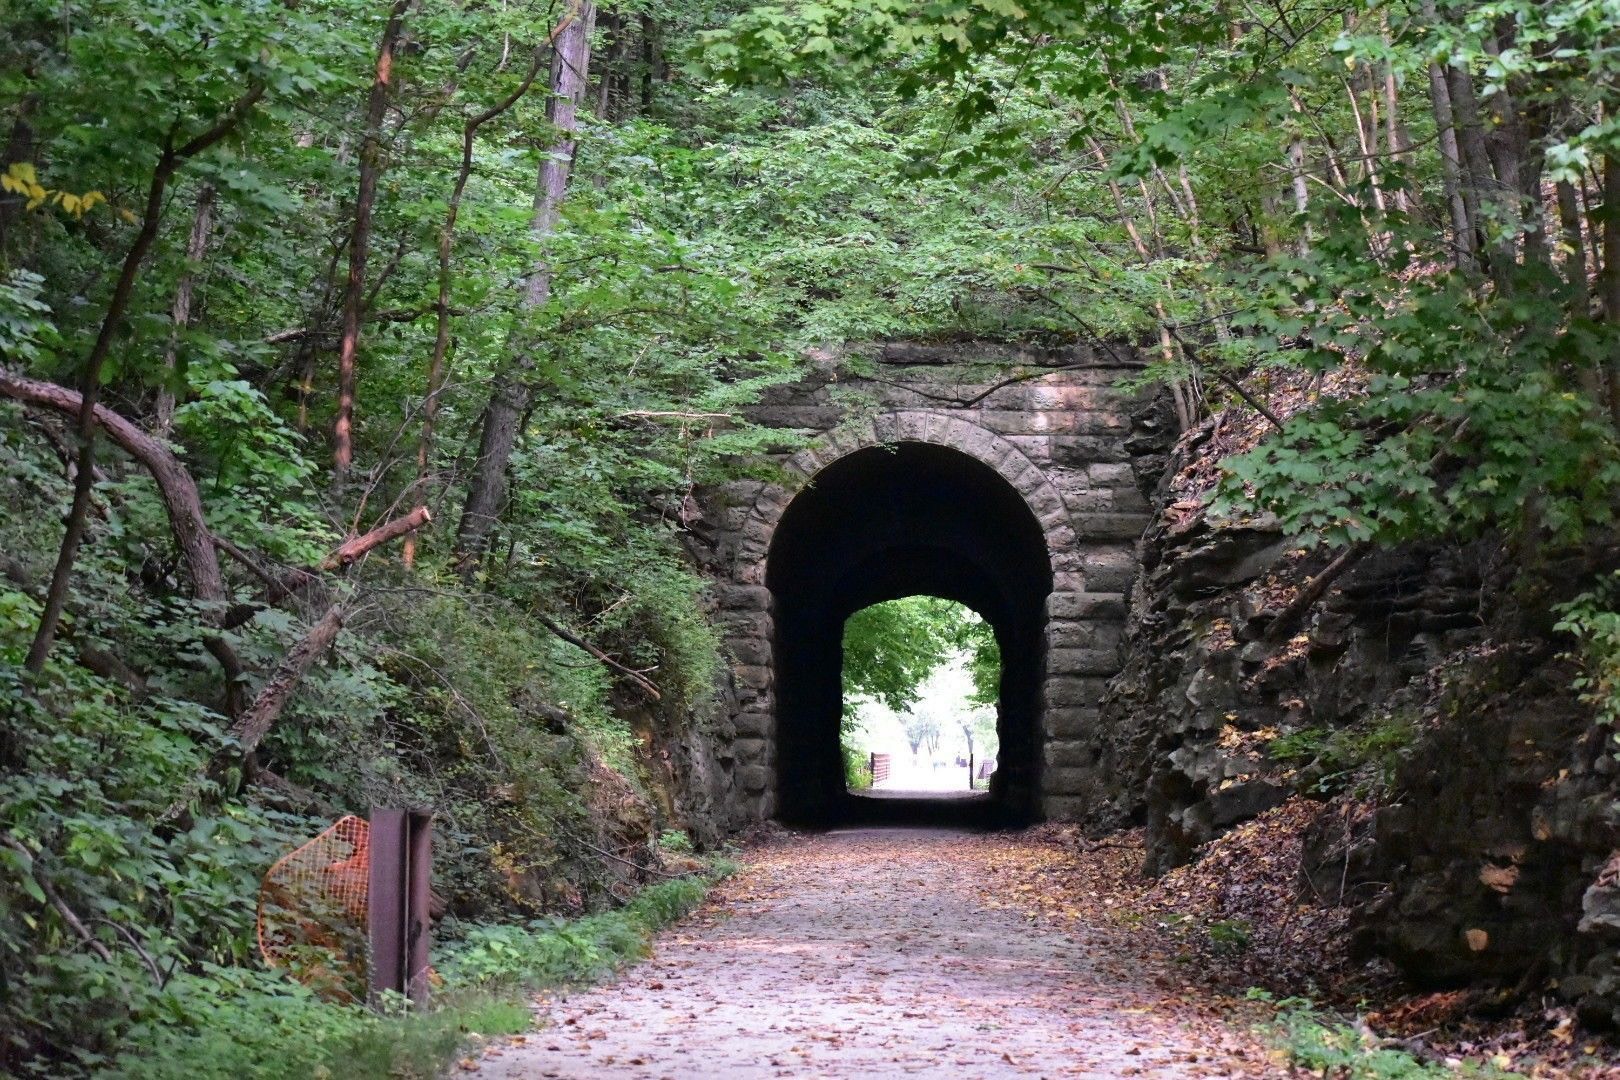 West Side of Tunnel